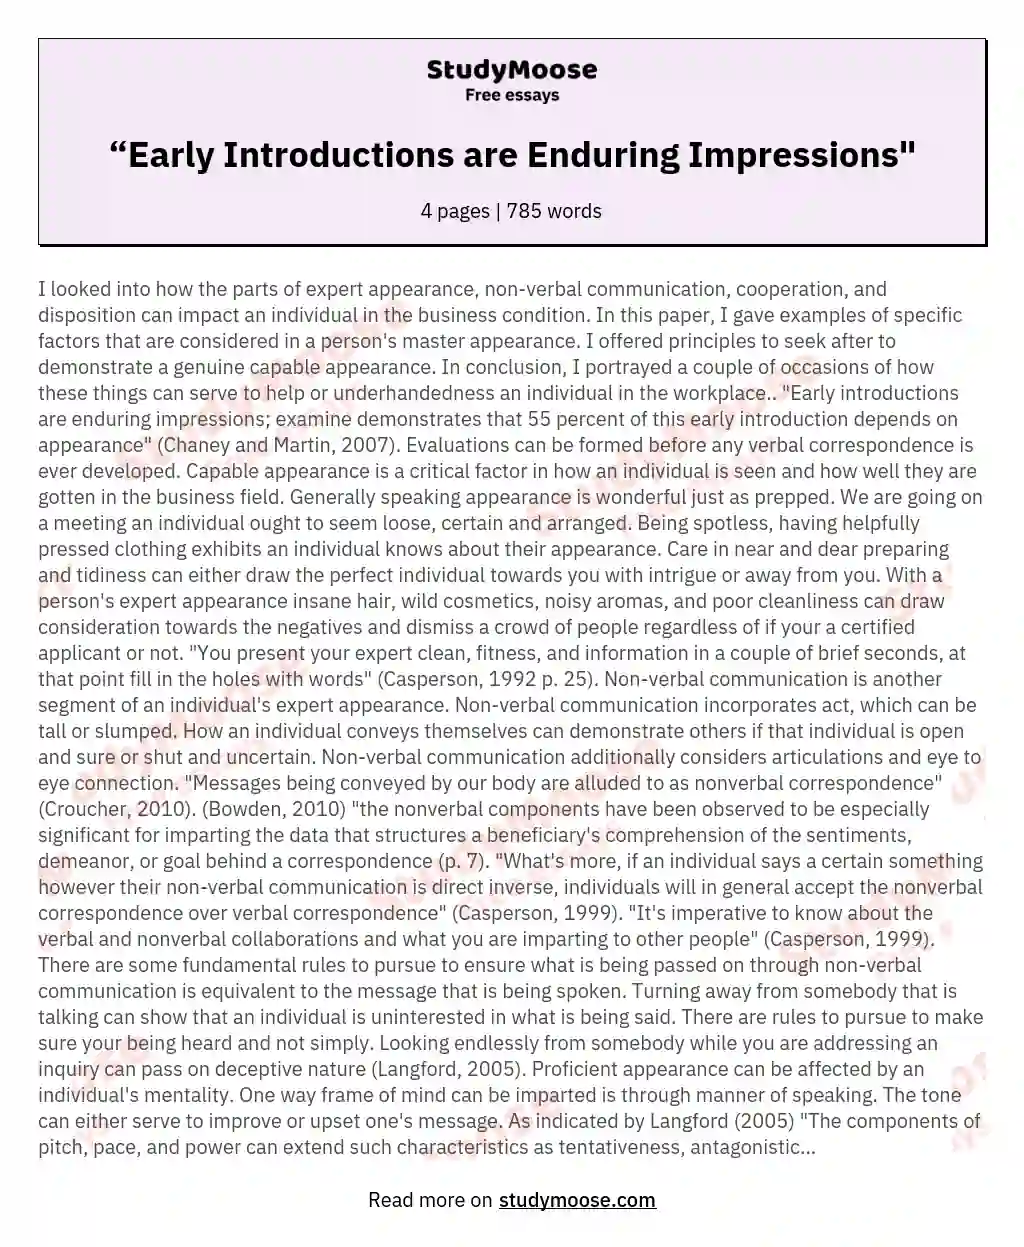 “Early Introductions are Enduring Impressions" essay